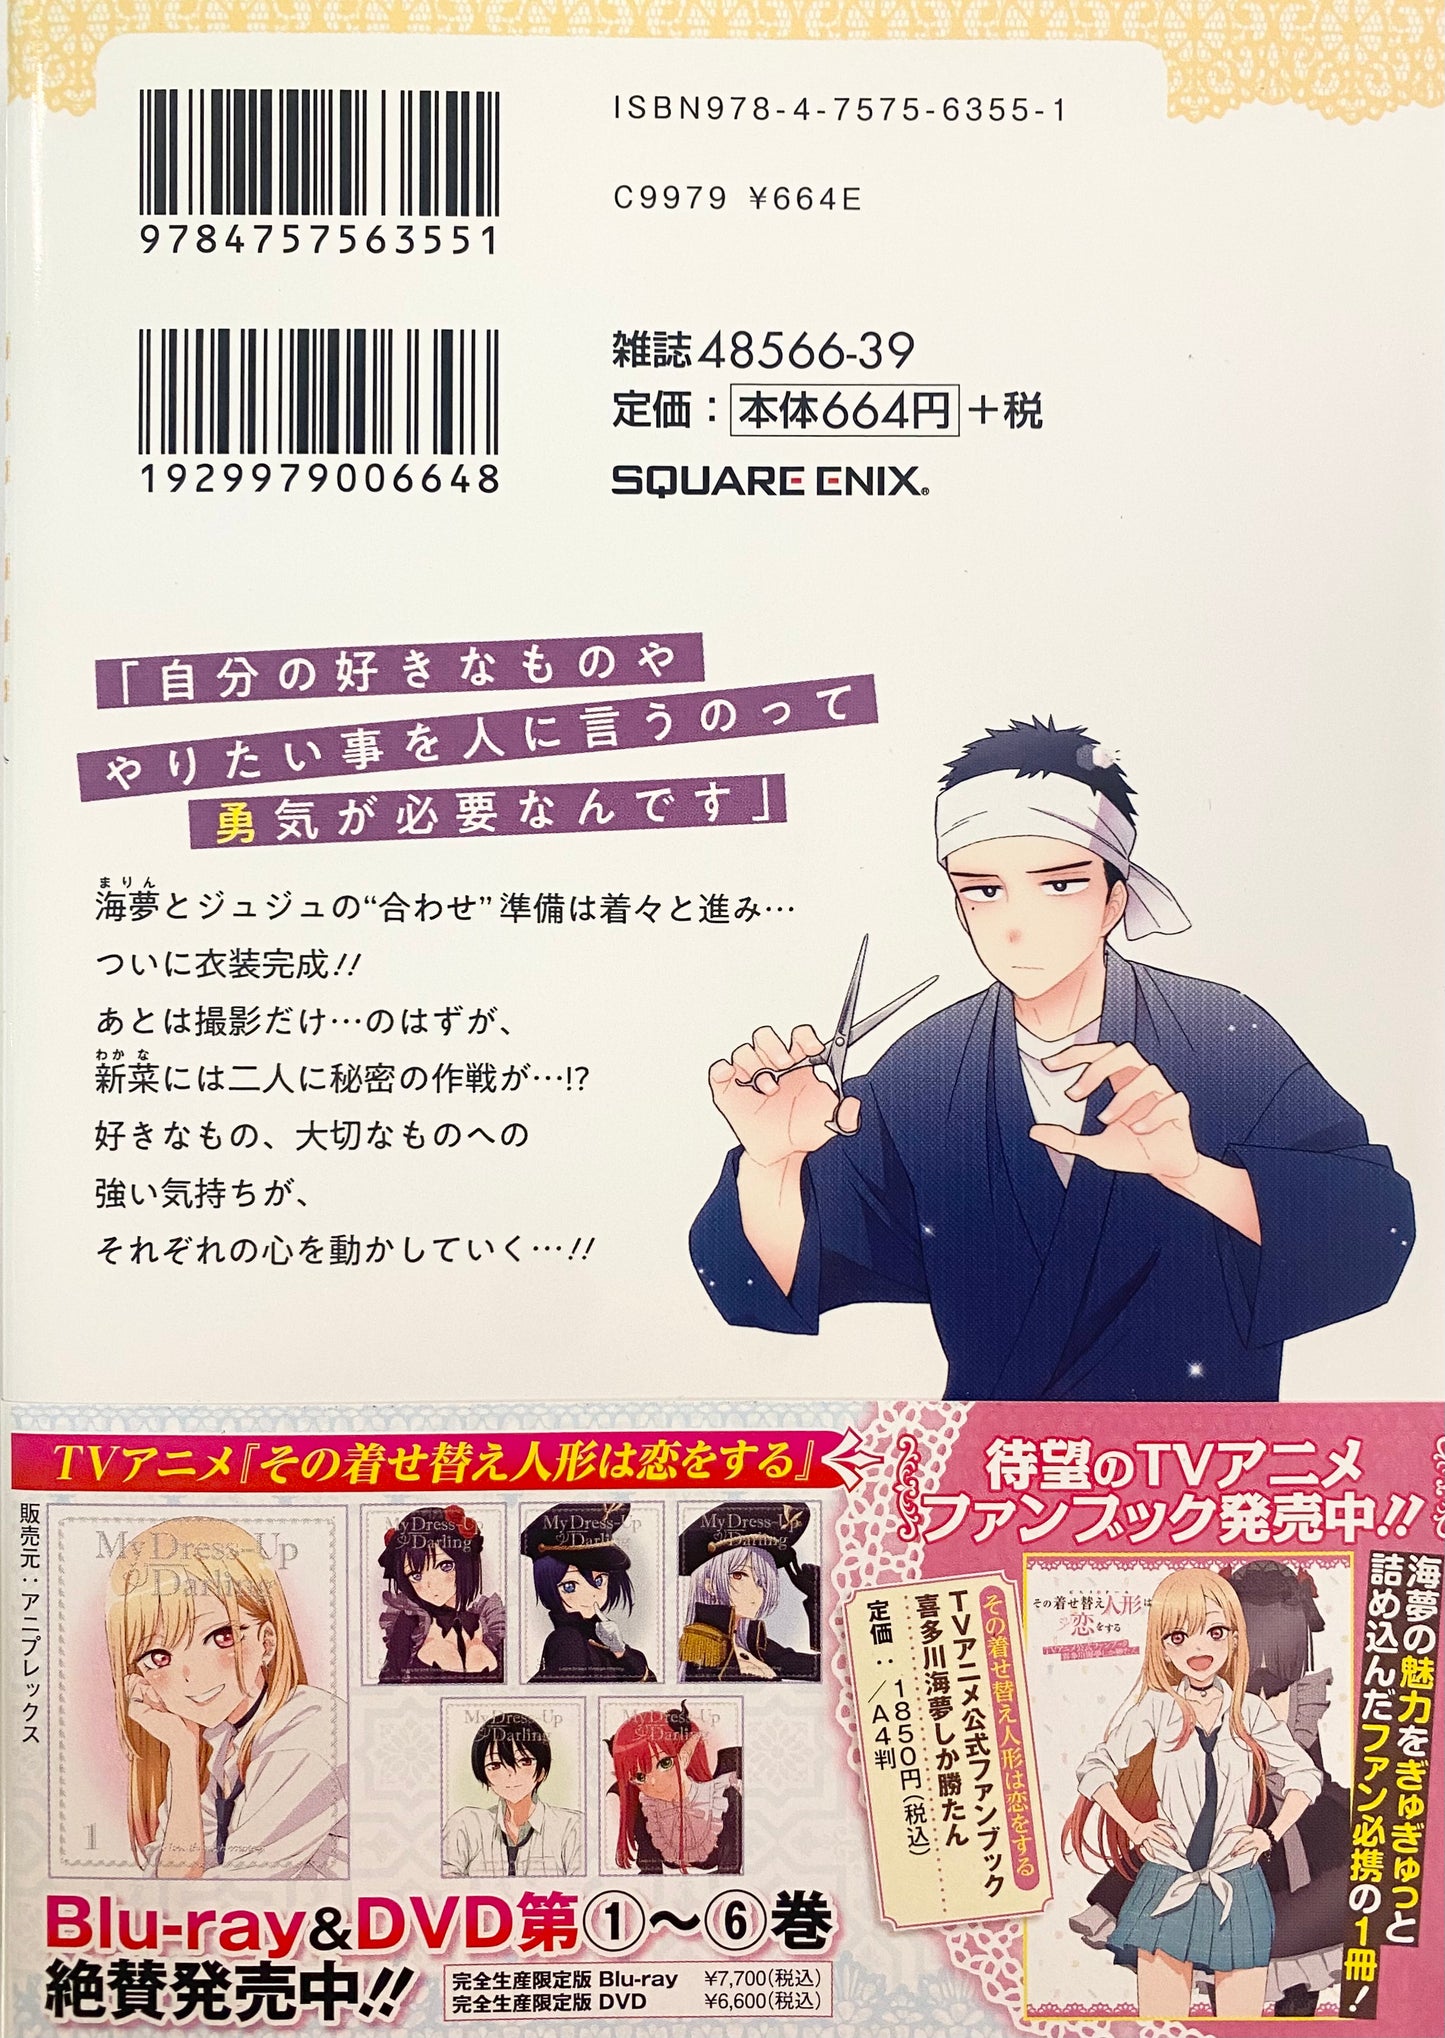 My Dress-Up Darling Vol.4-Official Japanese Edition